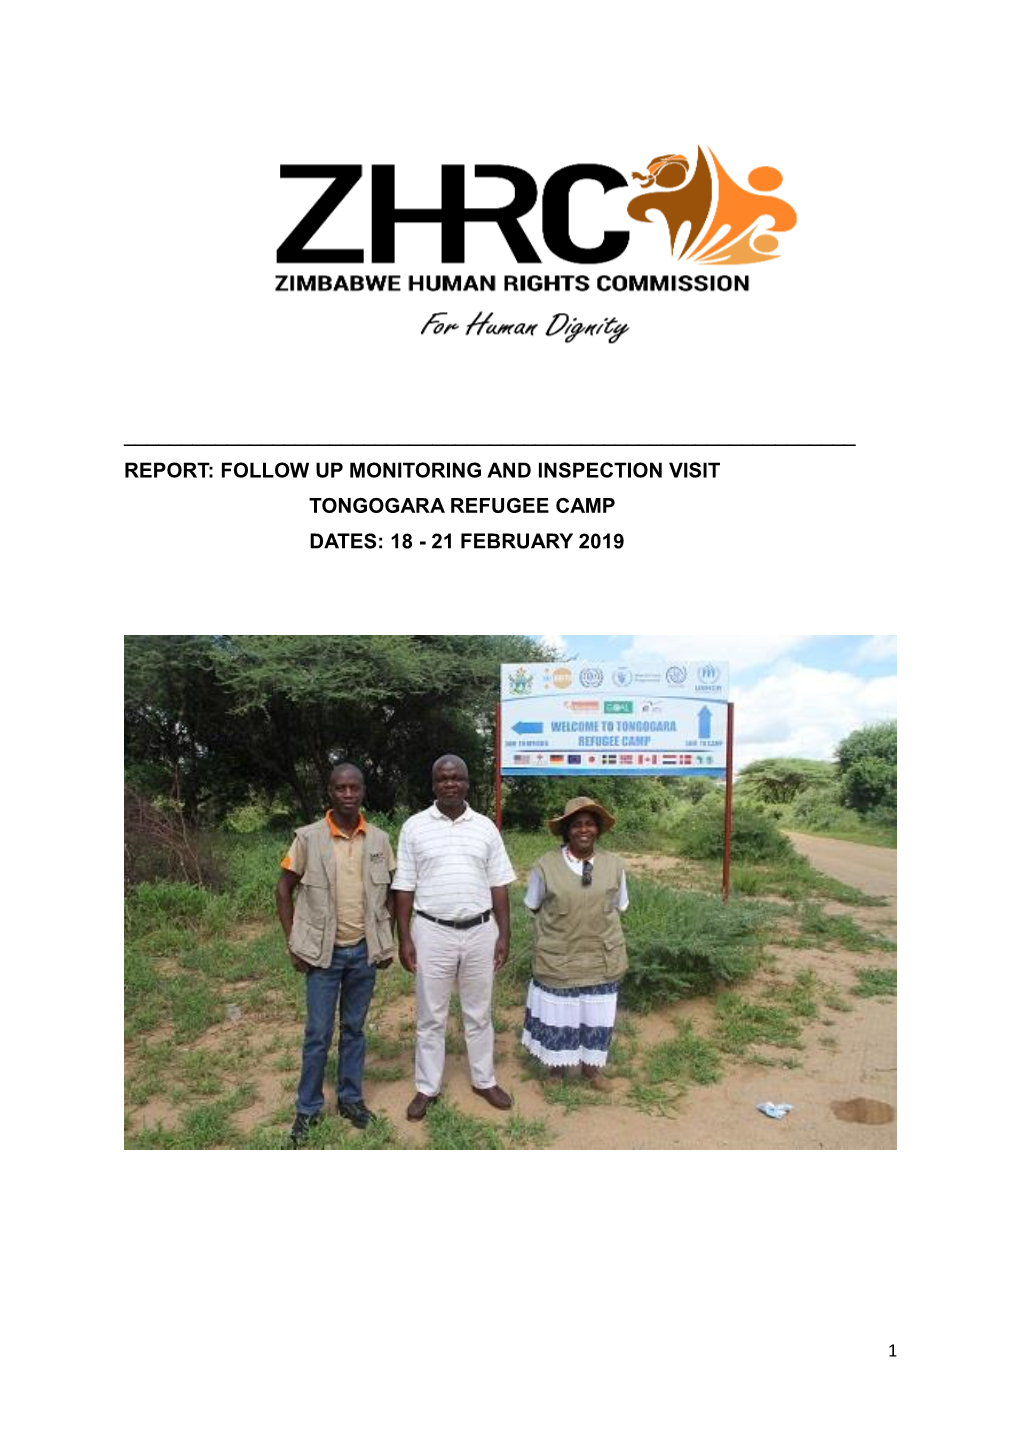 Follow up Monitoring and Inspection Visit Tongogara Refugee Camp Dates: 18 - 21 February 2019